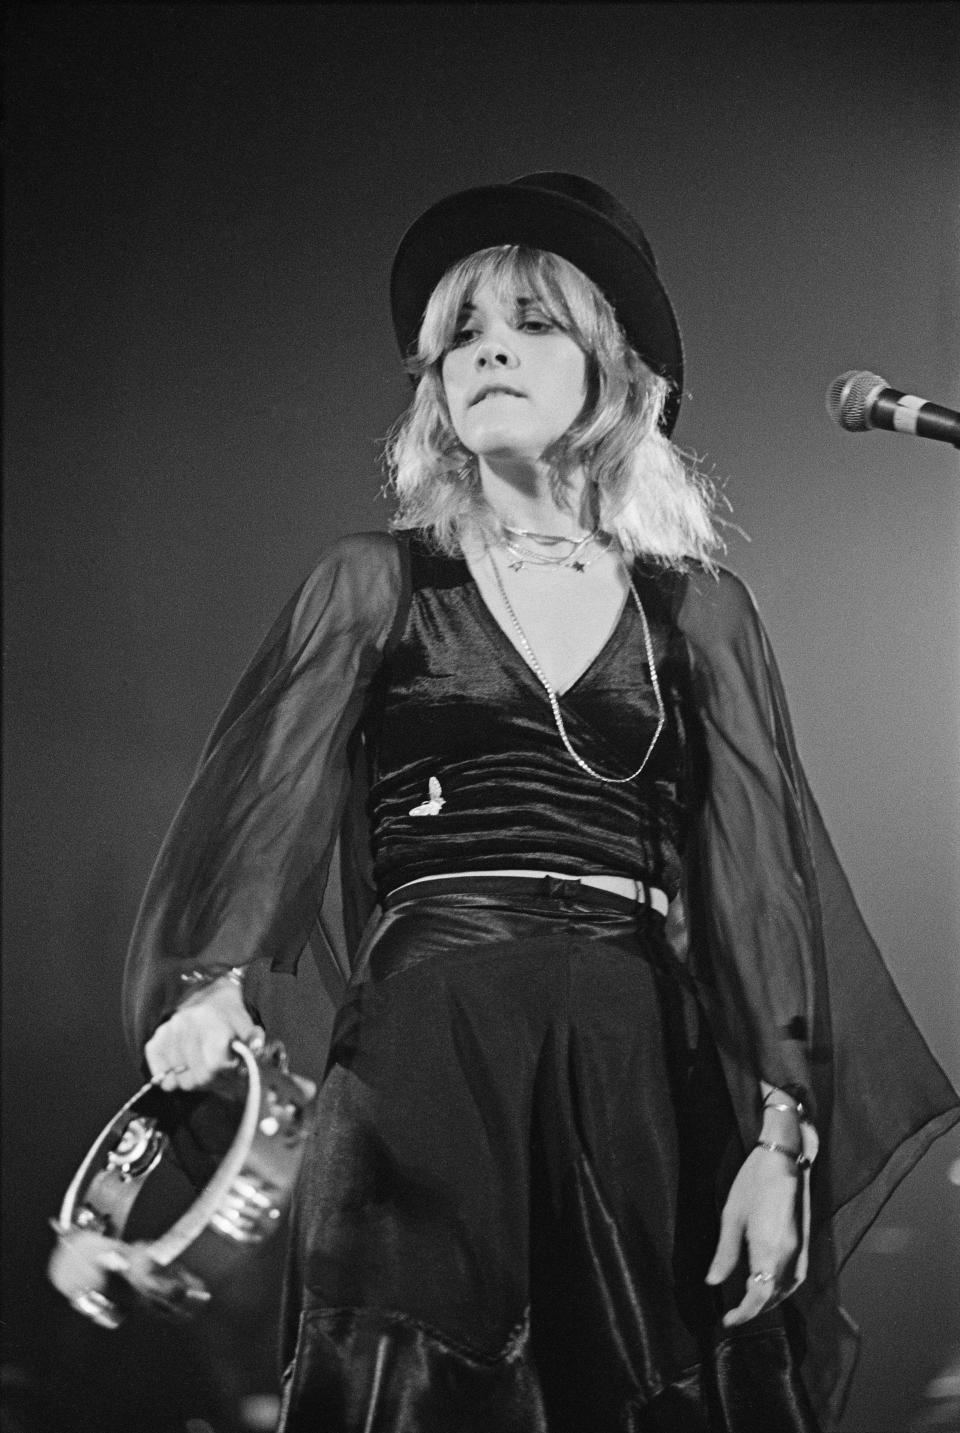 Nicks at Yale Coliseum in New Haven, Connecticut, in November 1975.